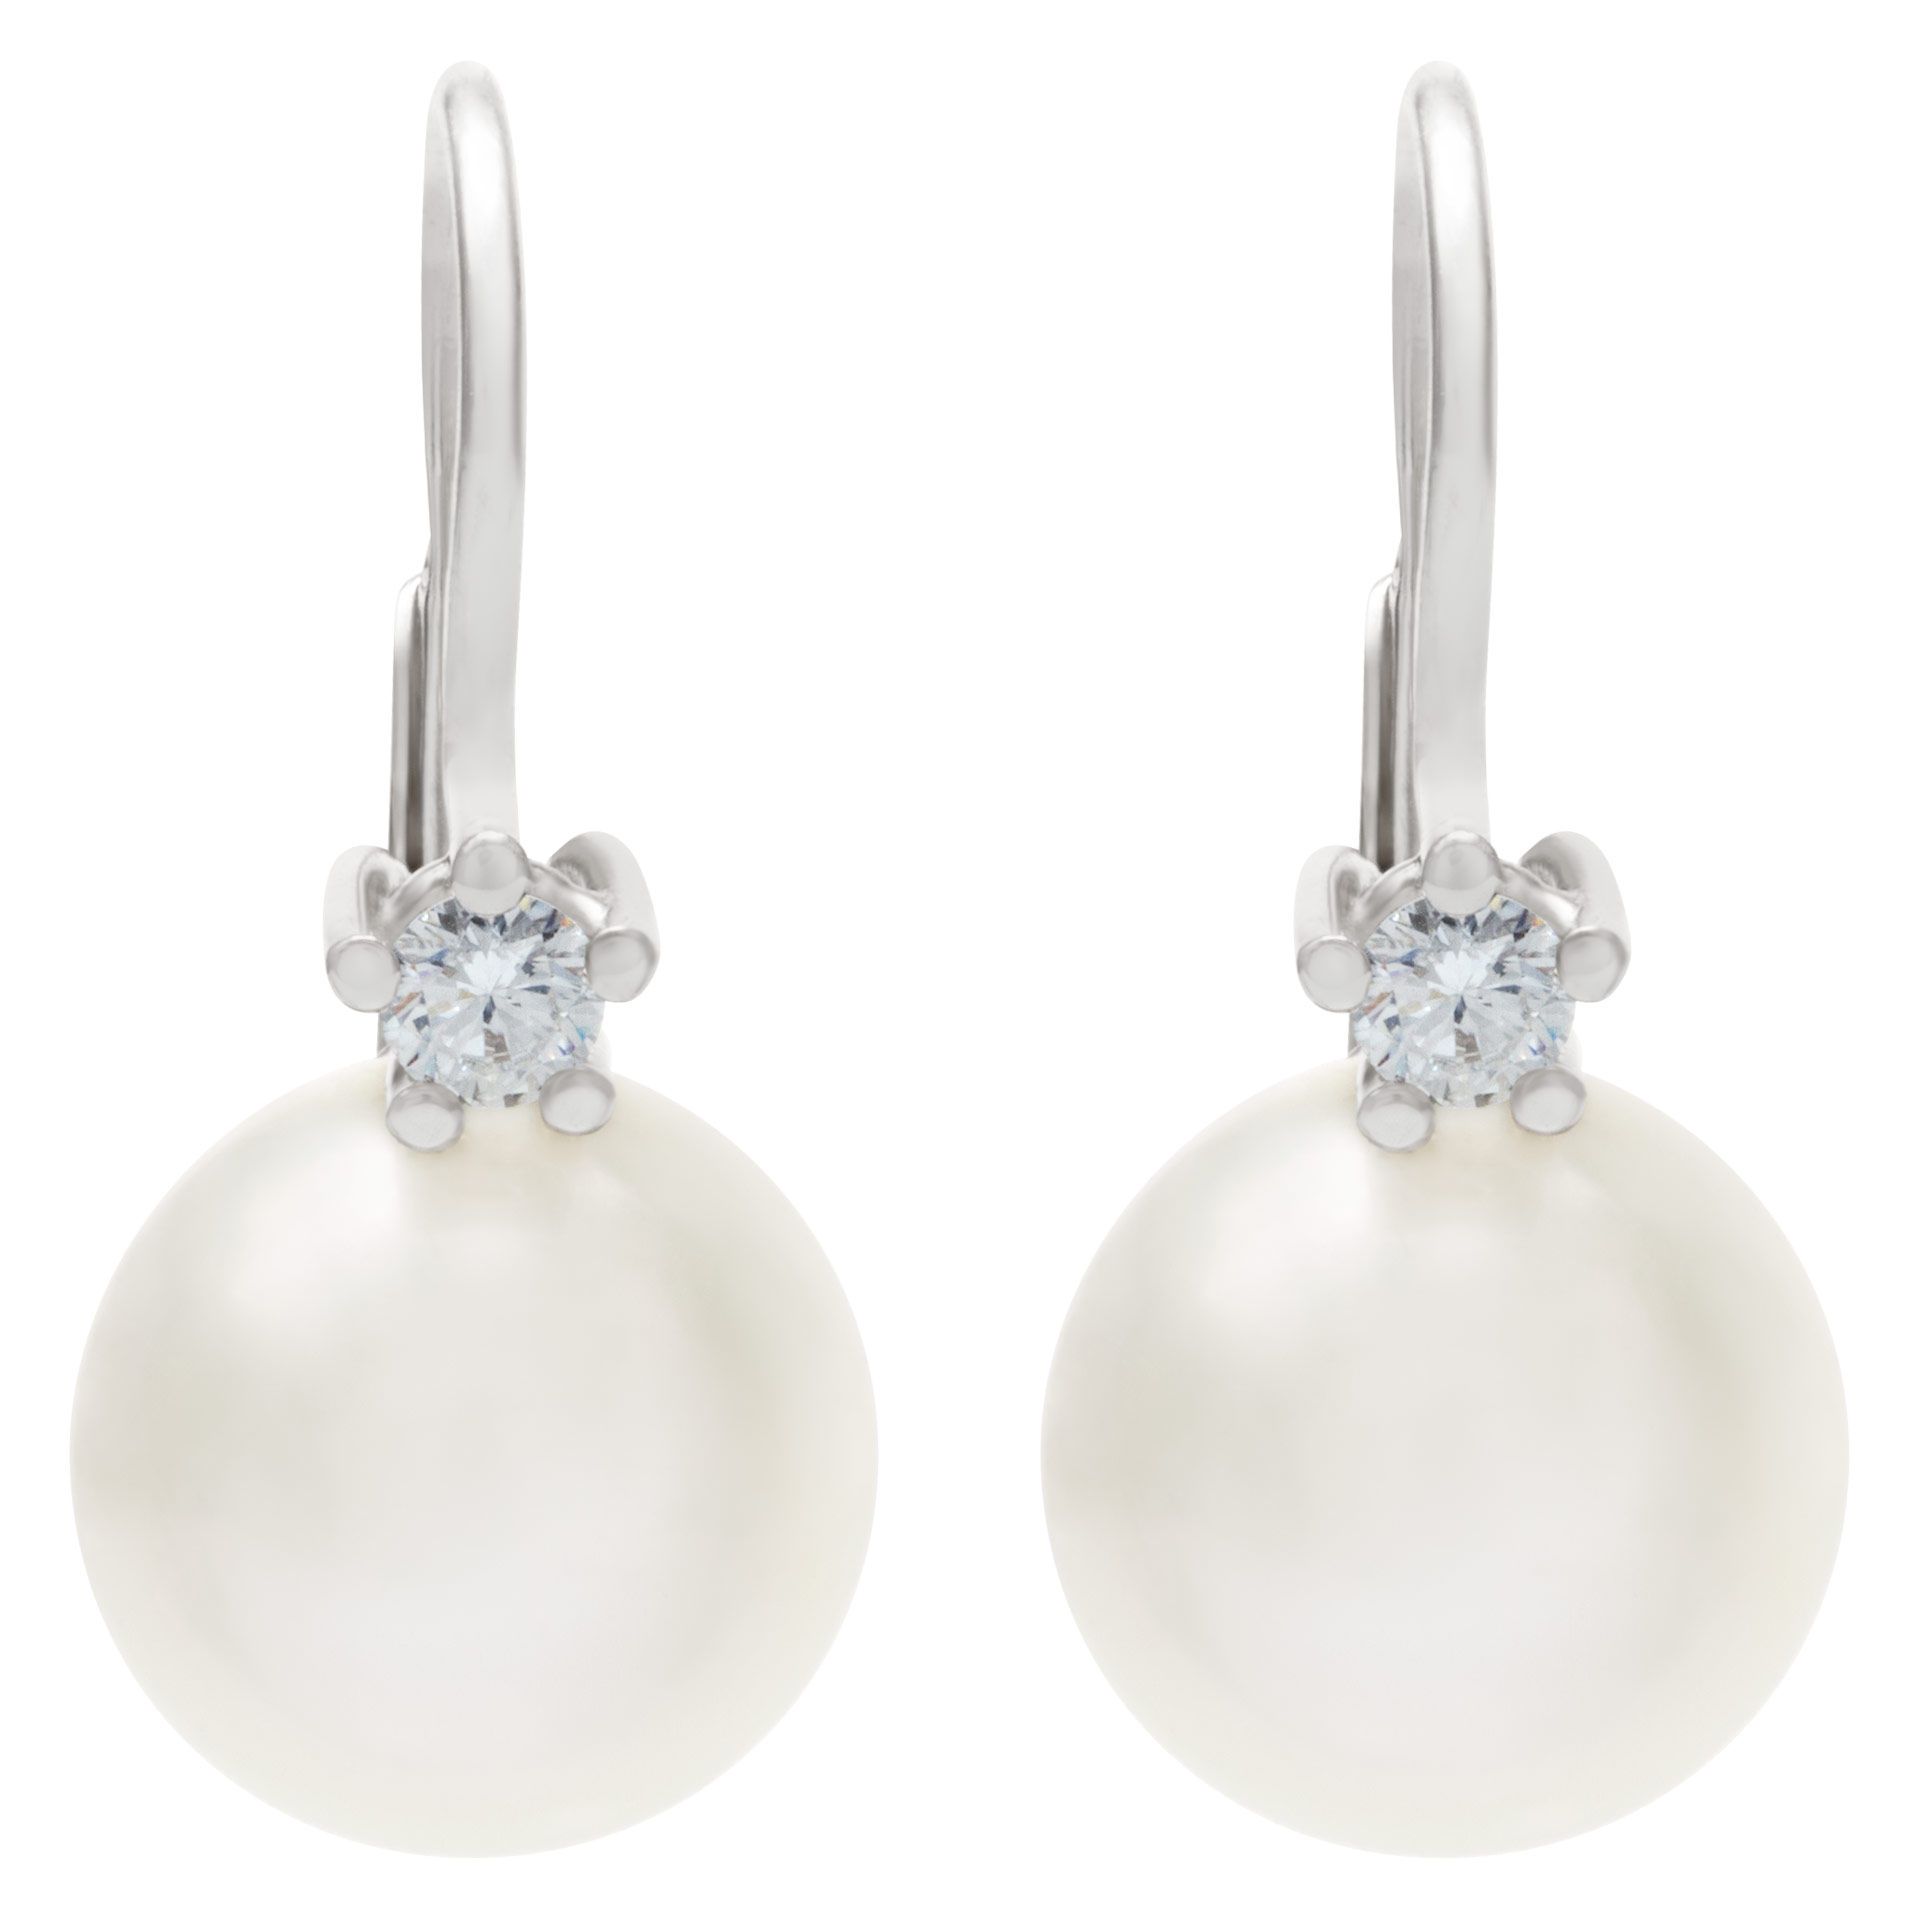 South Sea pearl with diamond accent earrings in 18k white gold. 0.24cts in diamonds.